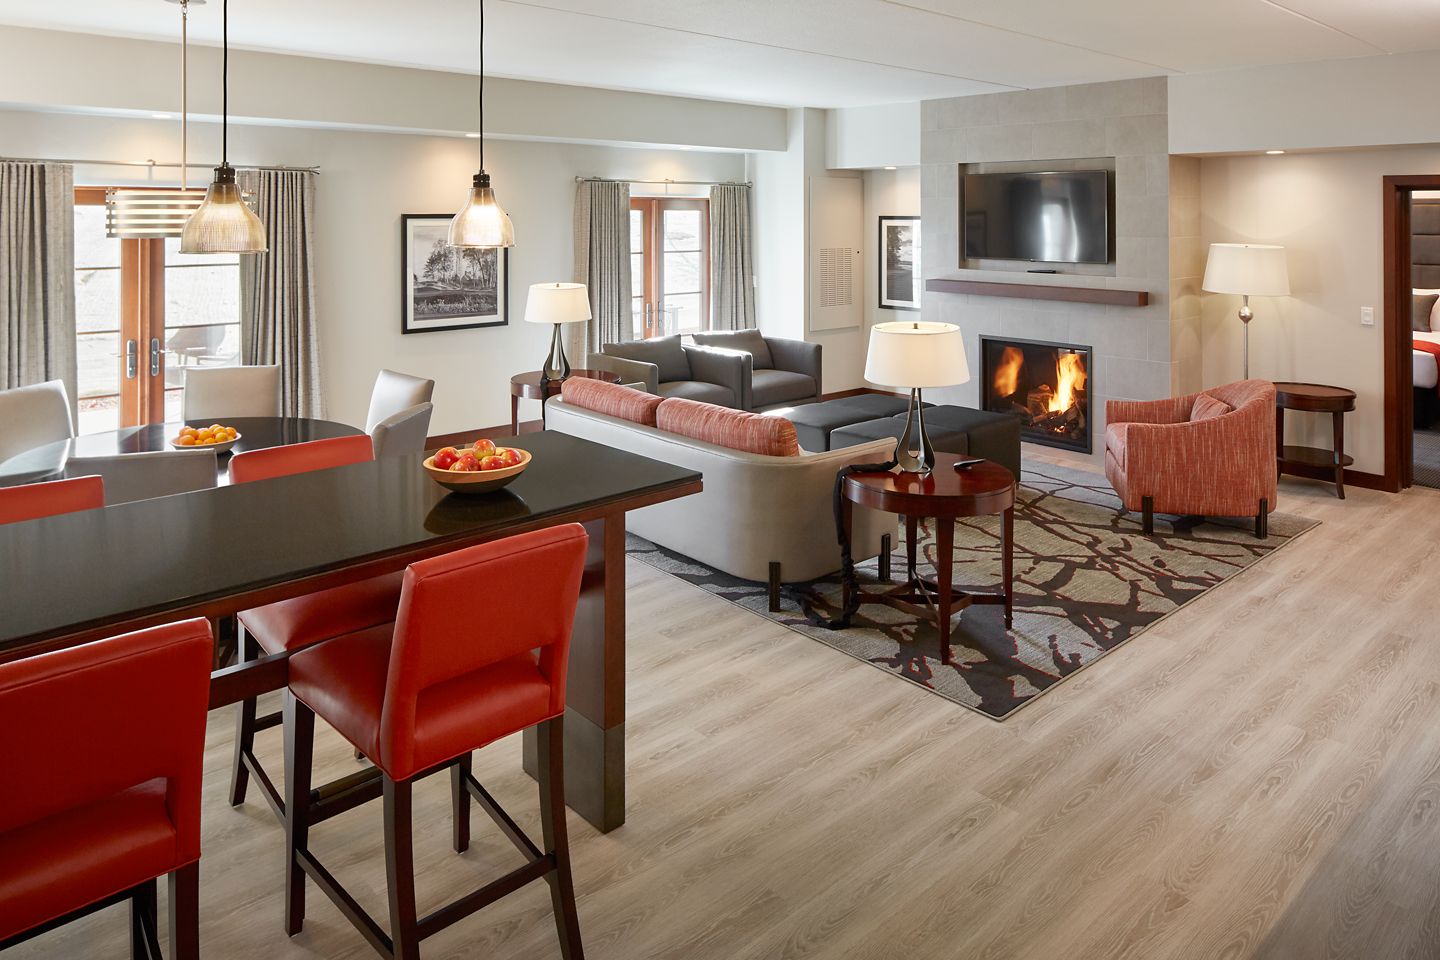 The interior of a suite at the Inn on Woodlake featuring a fireplace and a seating area